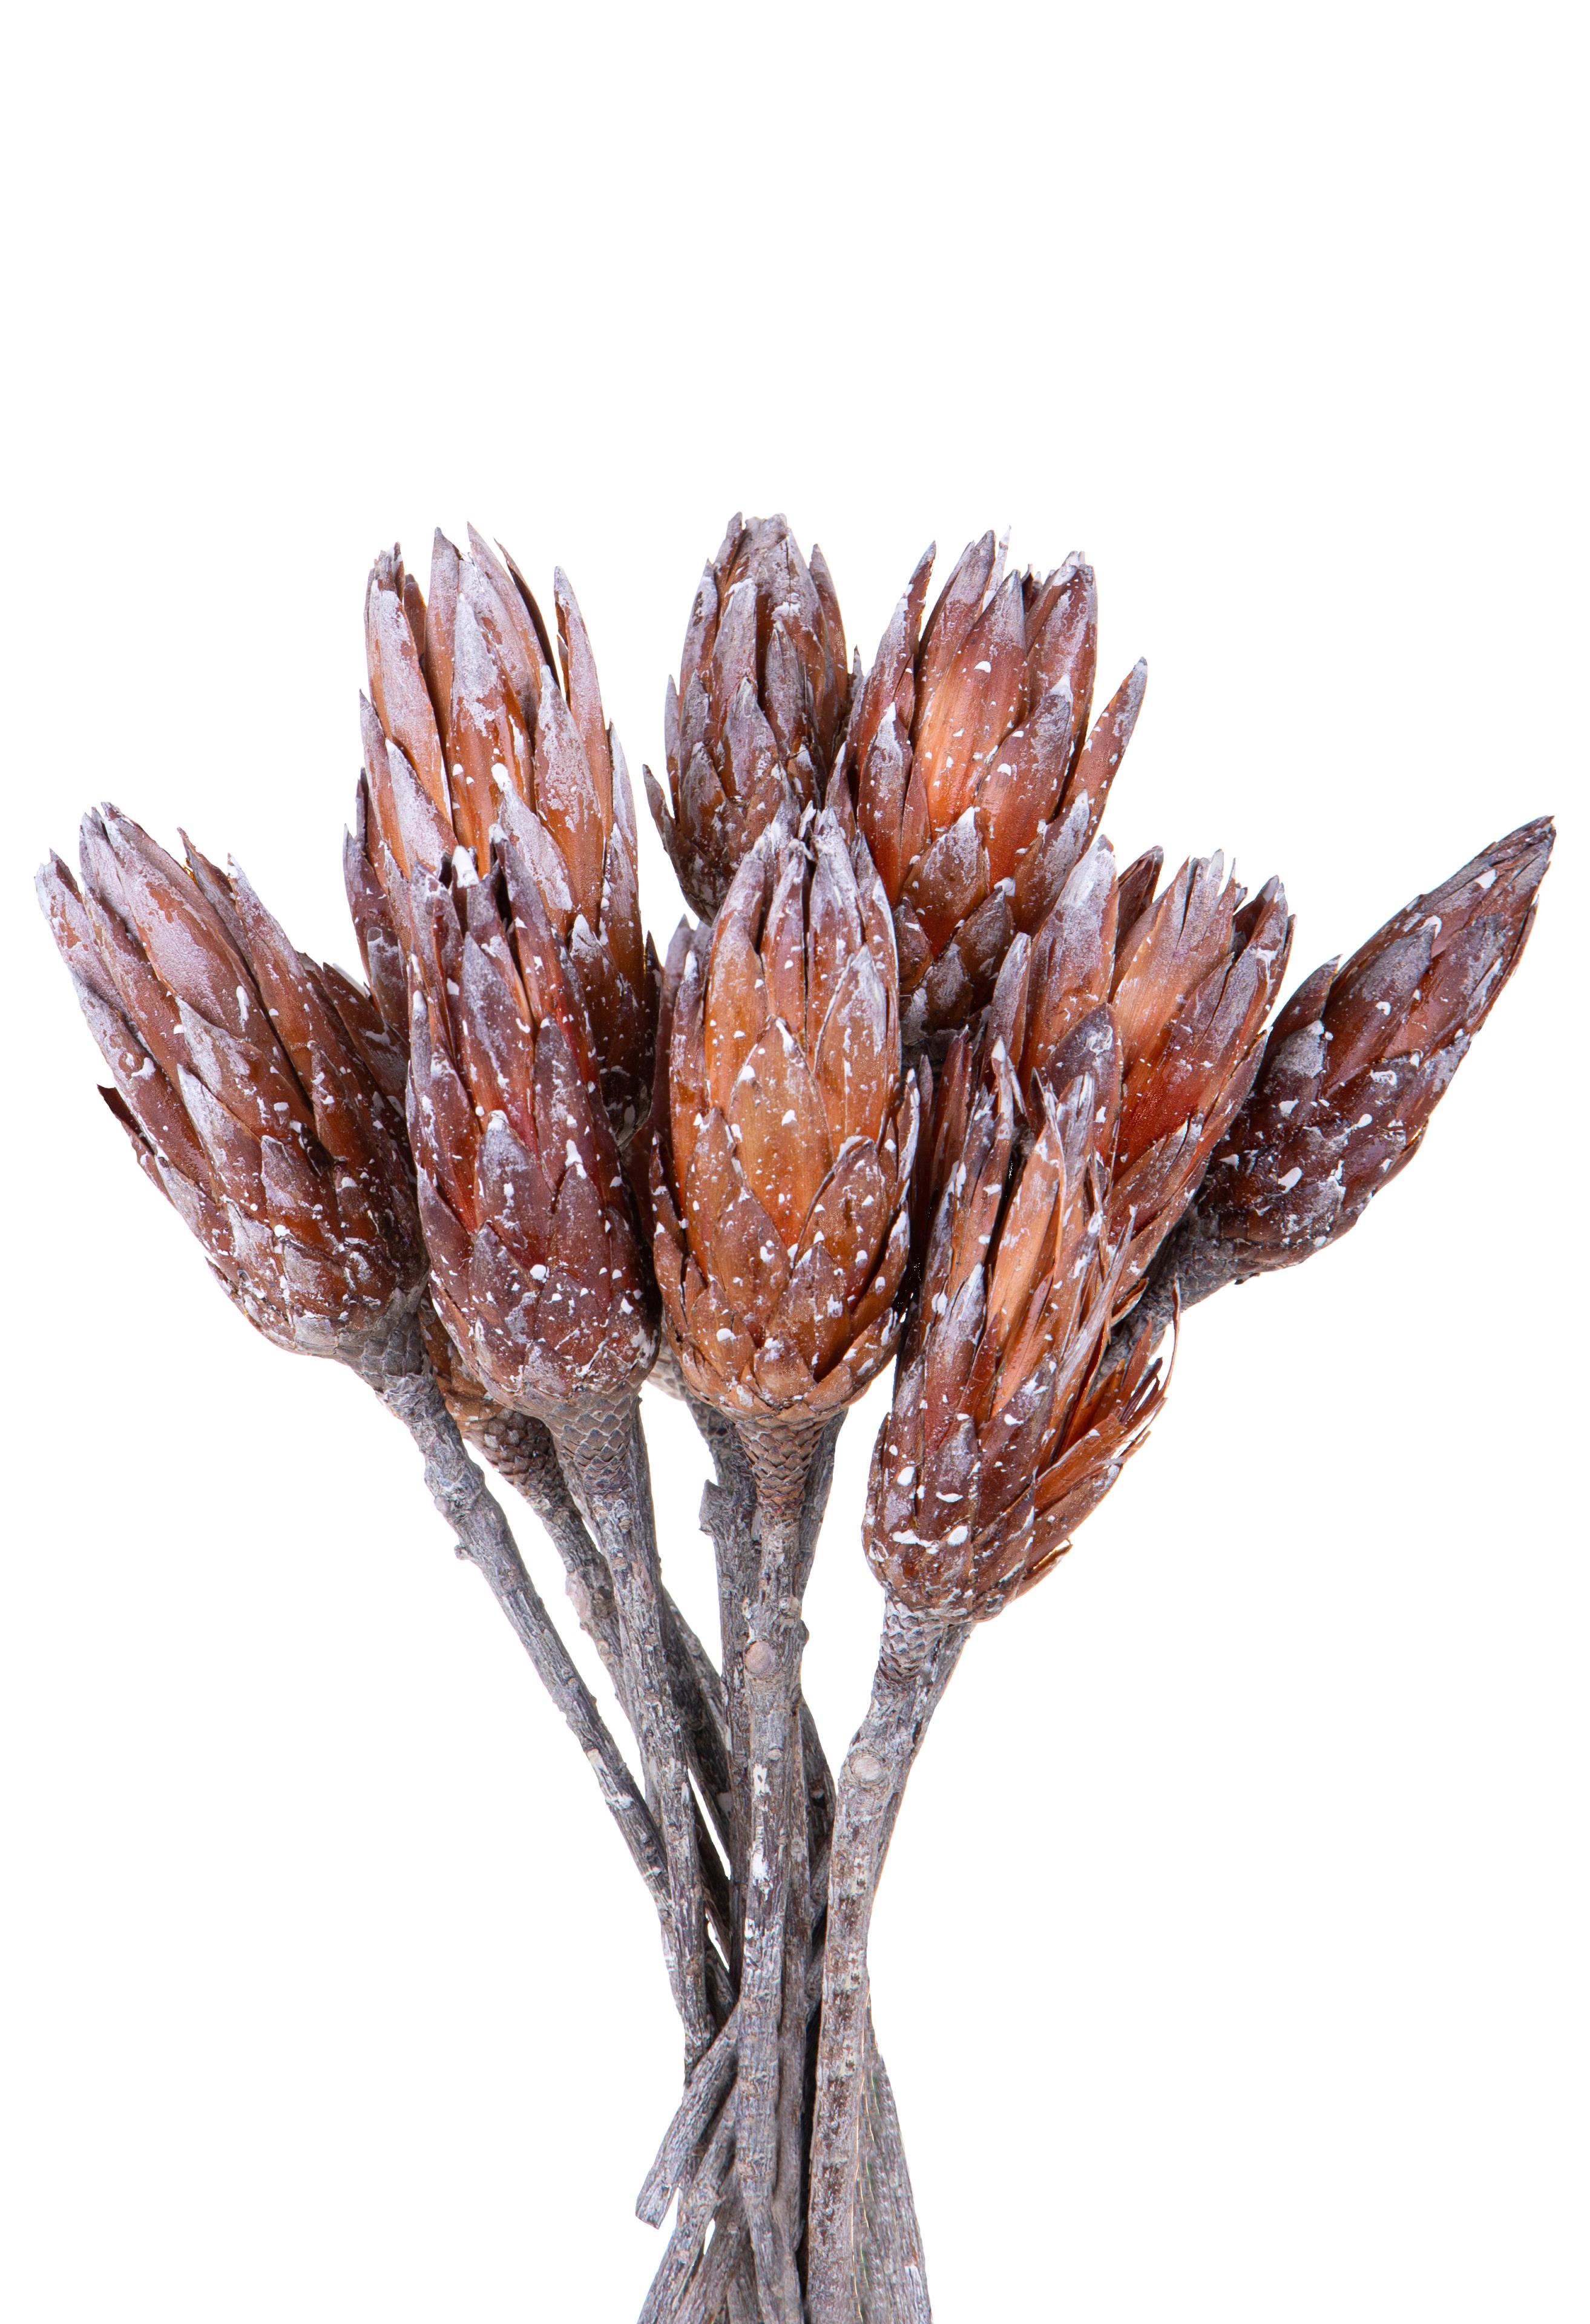 NATURAL PRODUCTS DRIED FLOWERS AND ERBS, EXOTICS AND DECORATION, REPENS CALCINATA 1 PZ 30 CM